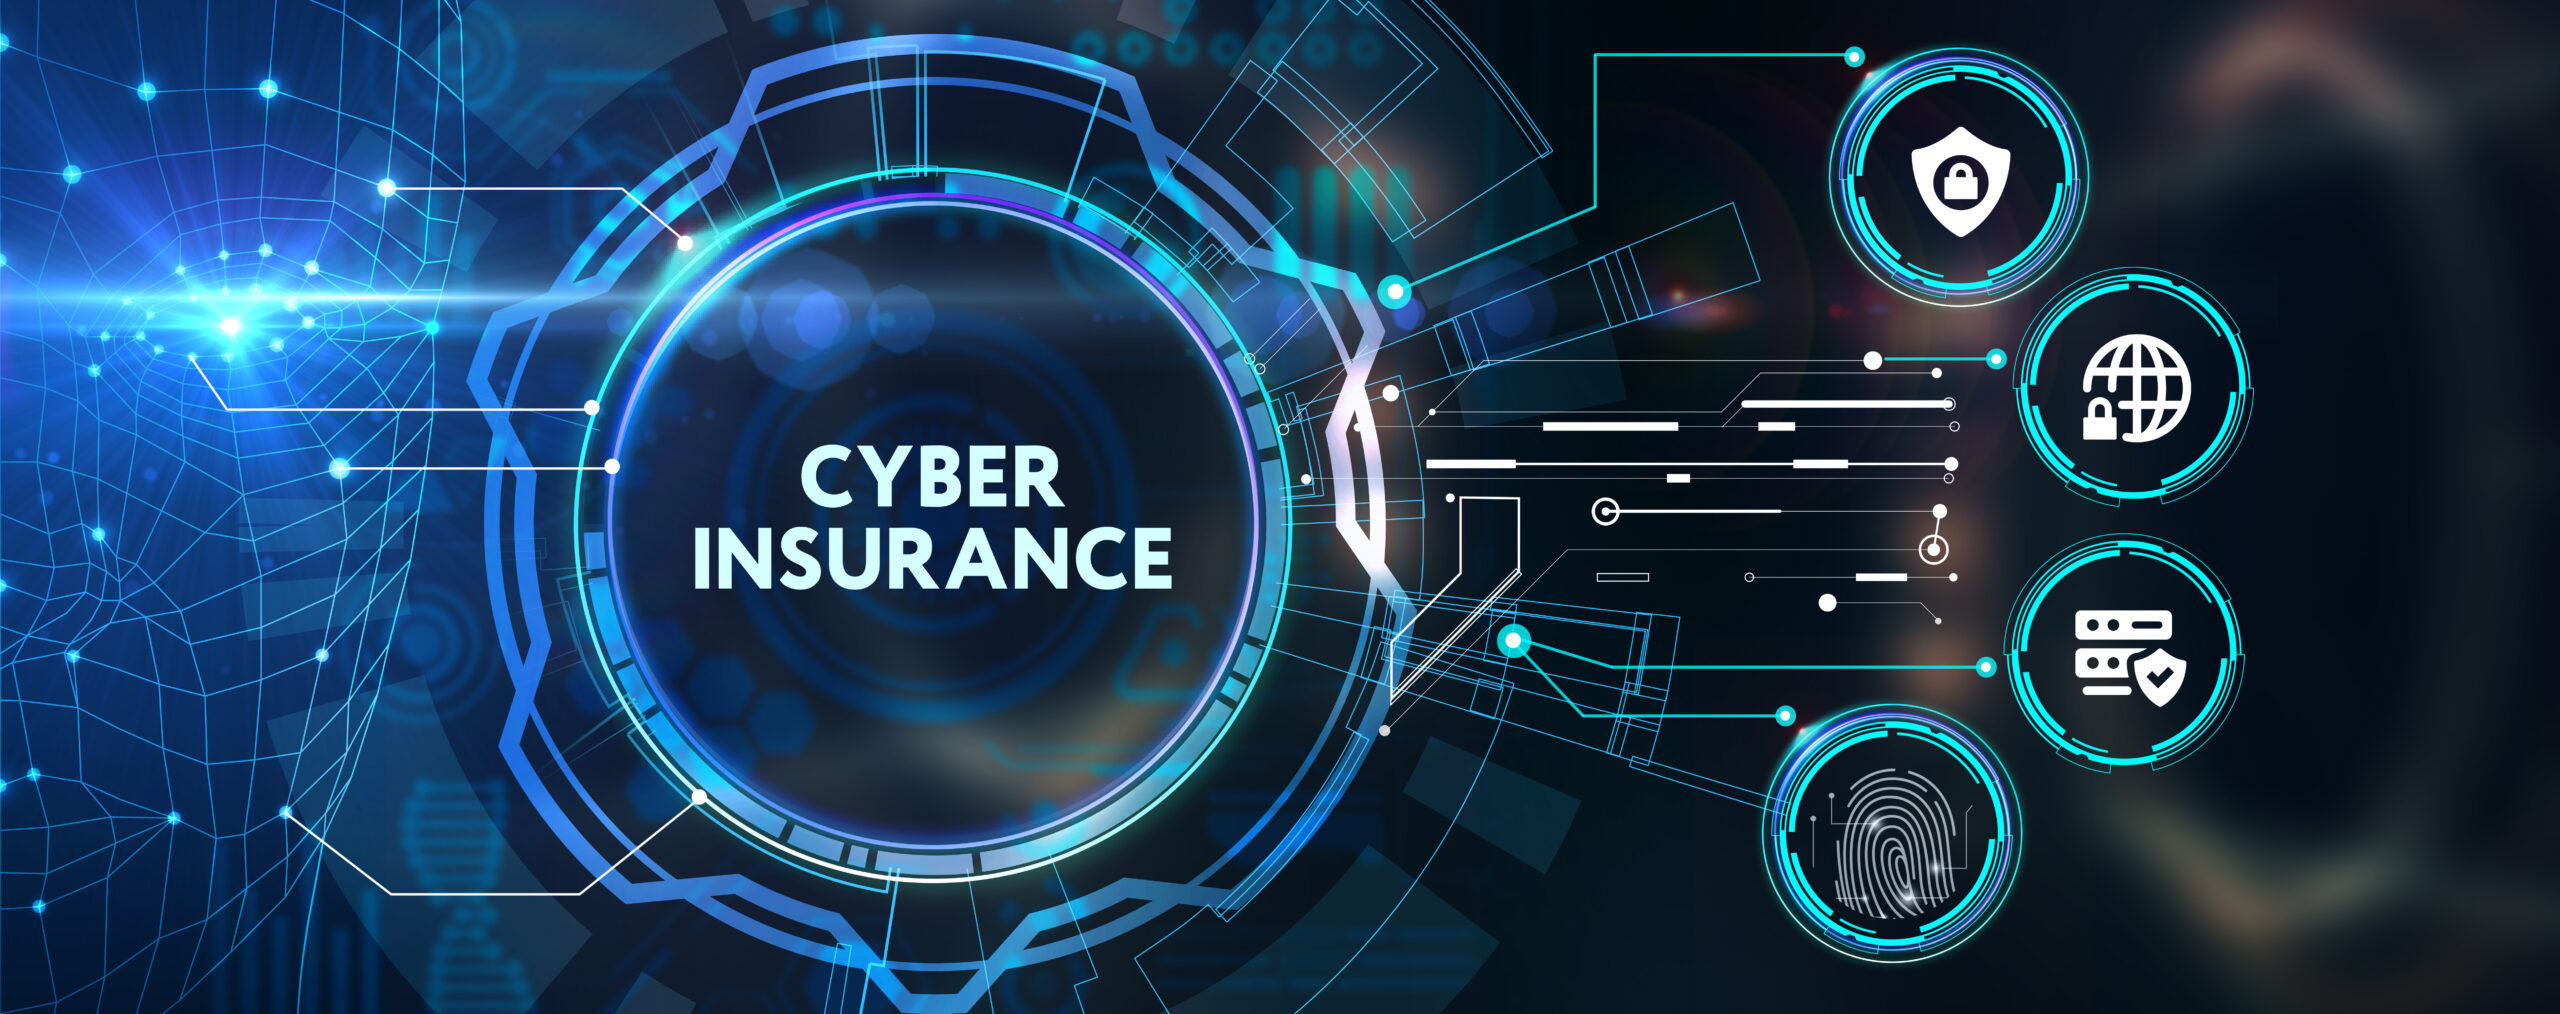 FERMA: Appeal of Cyber Insurance May Weaken Without ‘Concerted Dialogue’